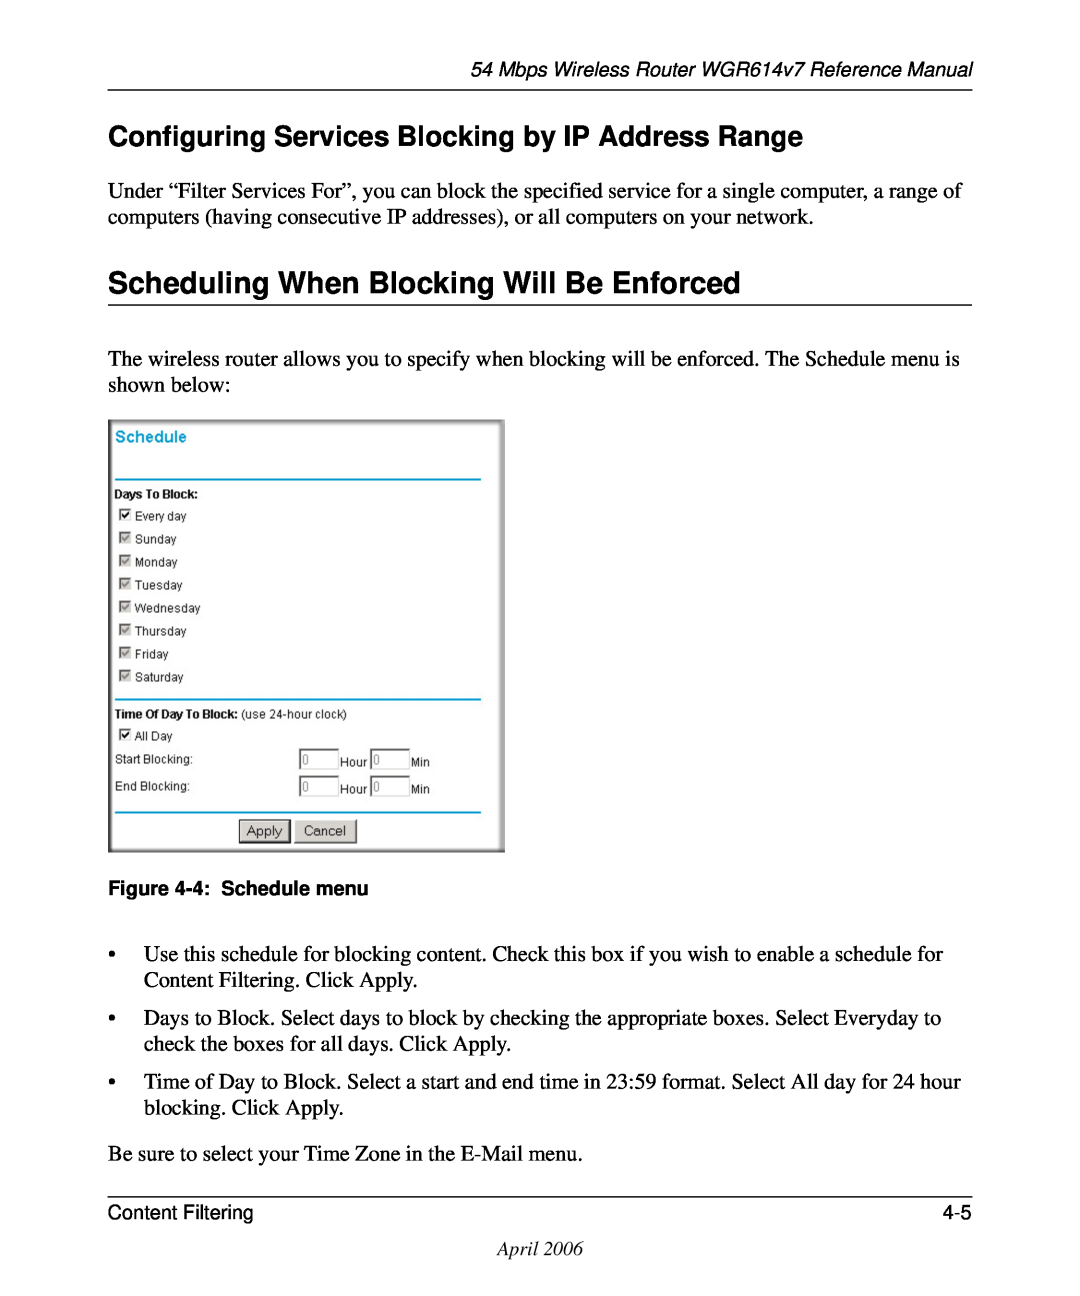 NETGEAR WGR614v7 manual Scheduling When Blocking Will Be Enforced, Configuring Services Blocking by IP Address Range 